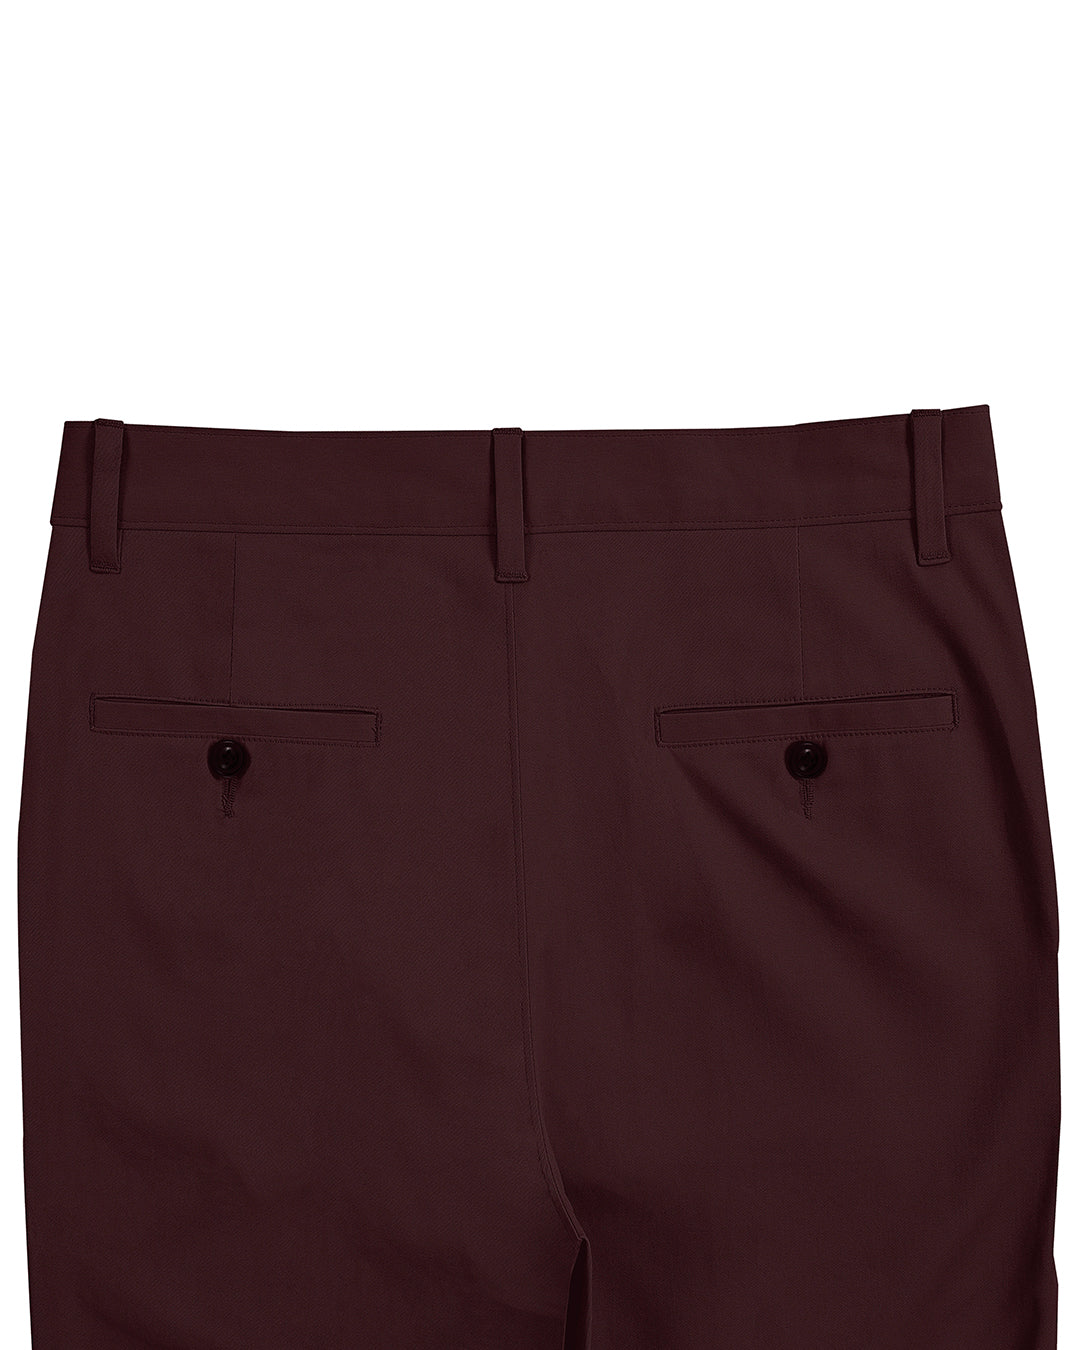 Back view of custom Genoa Chino pants for men by Luxire in plum